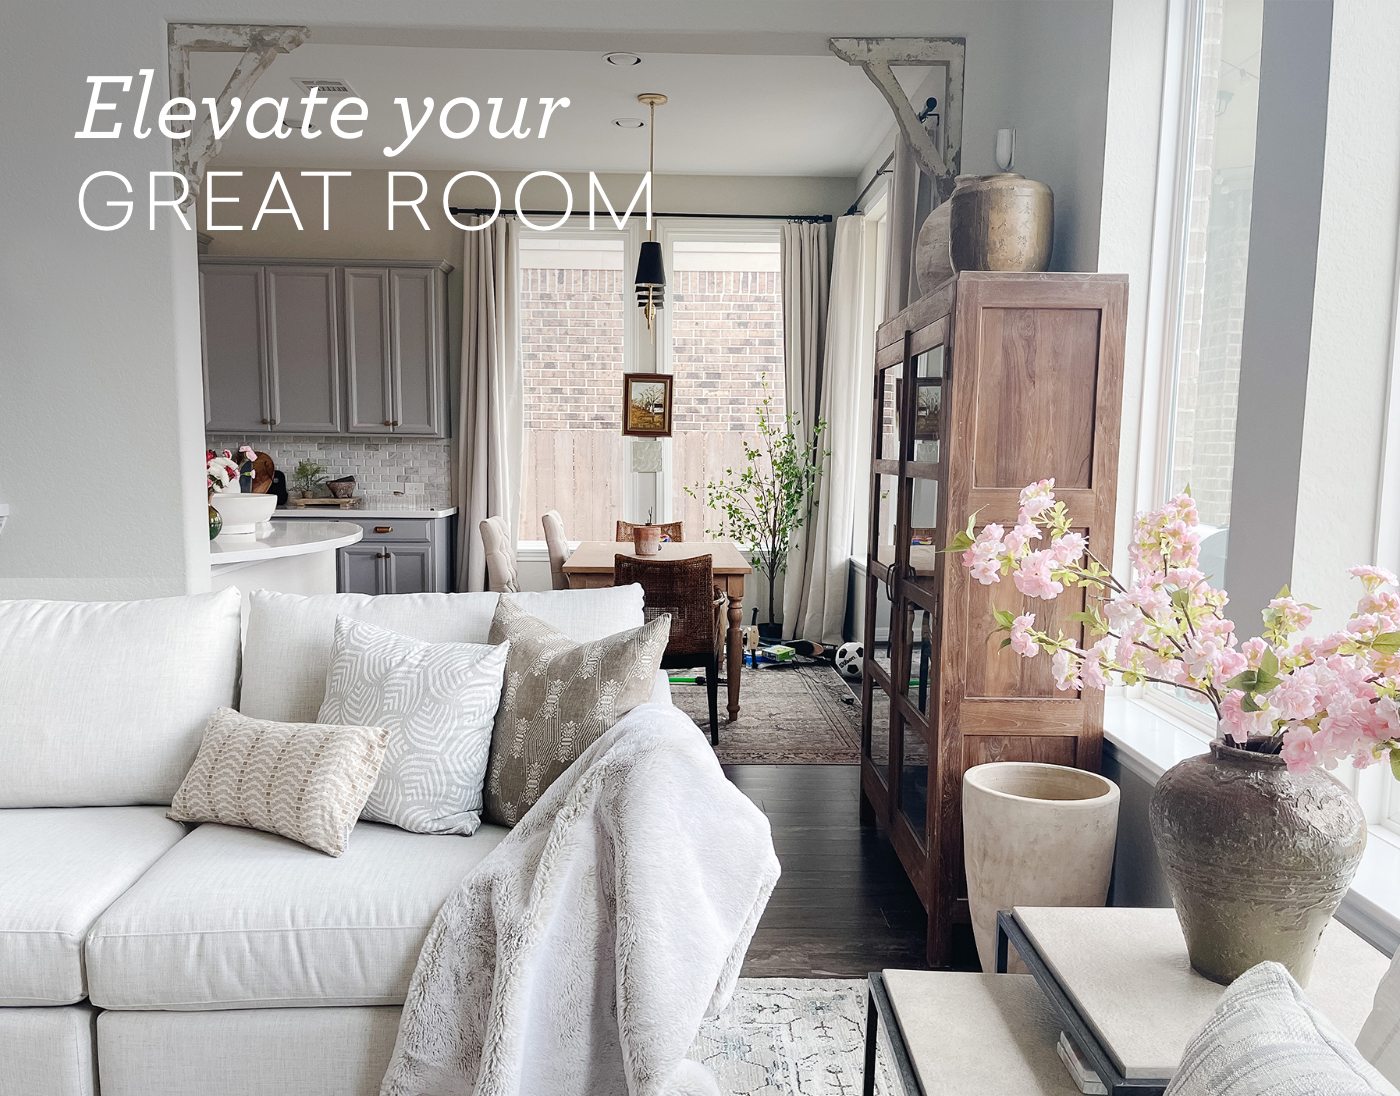 Elevate your great room.